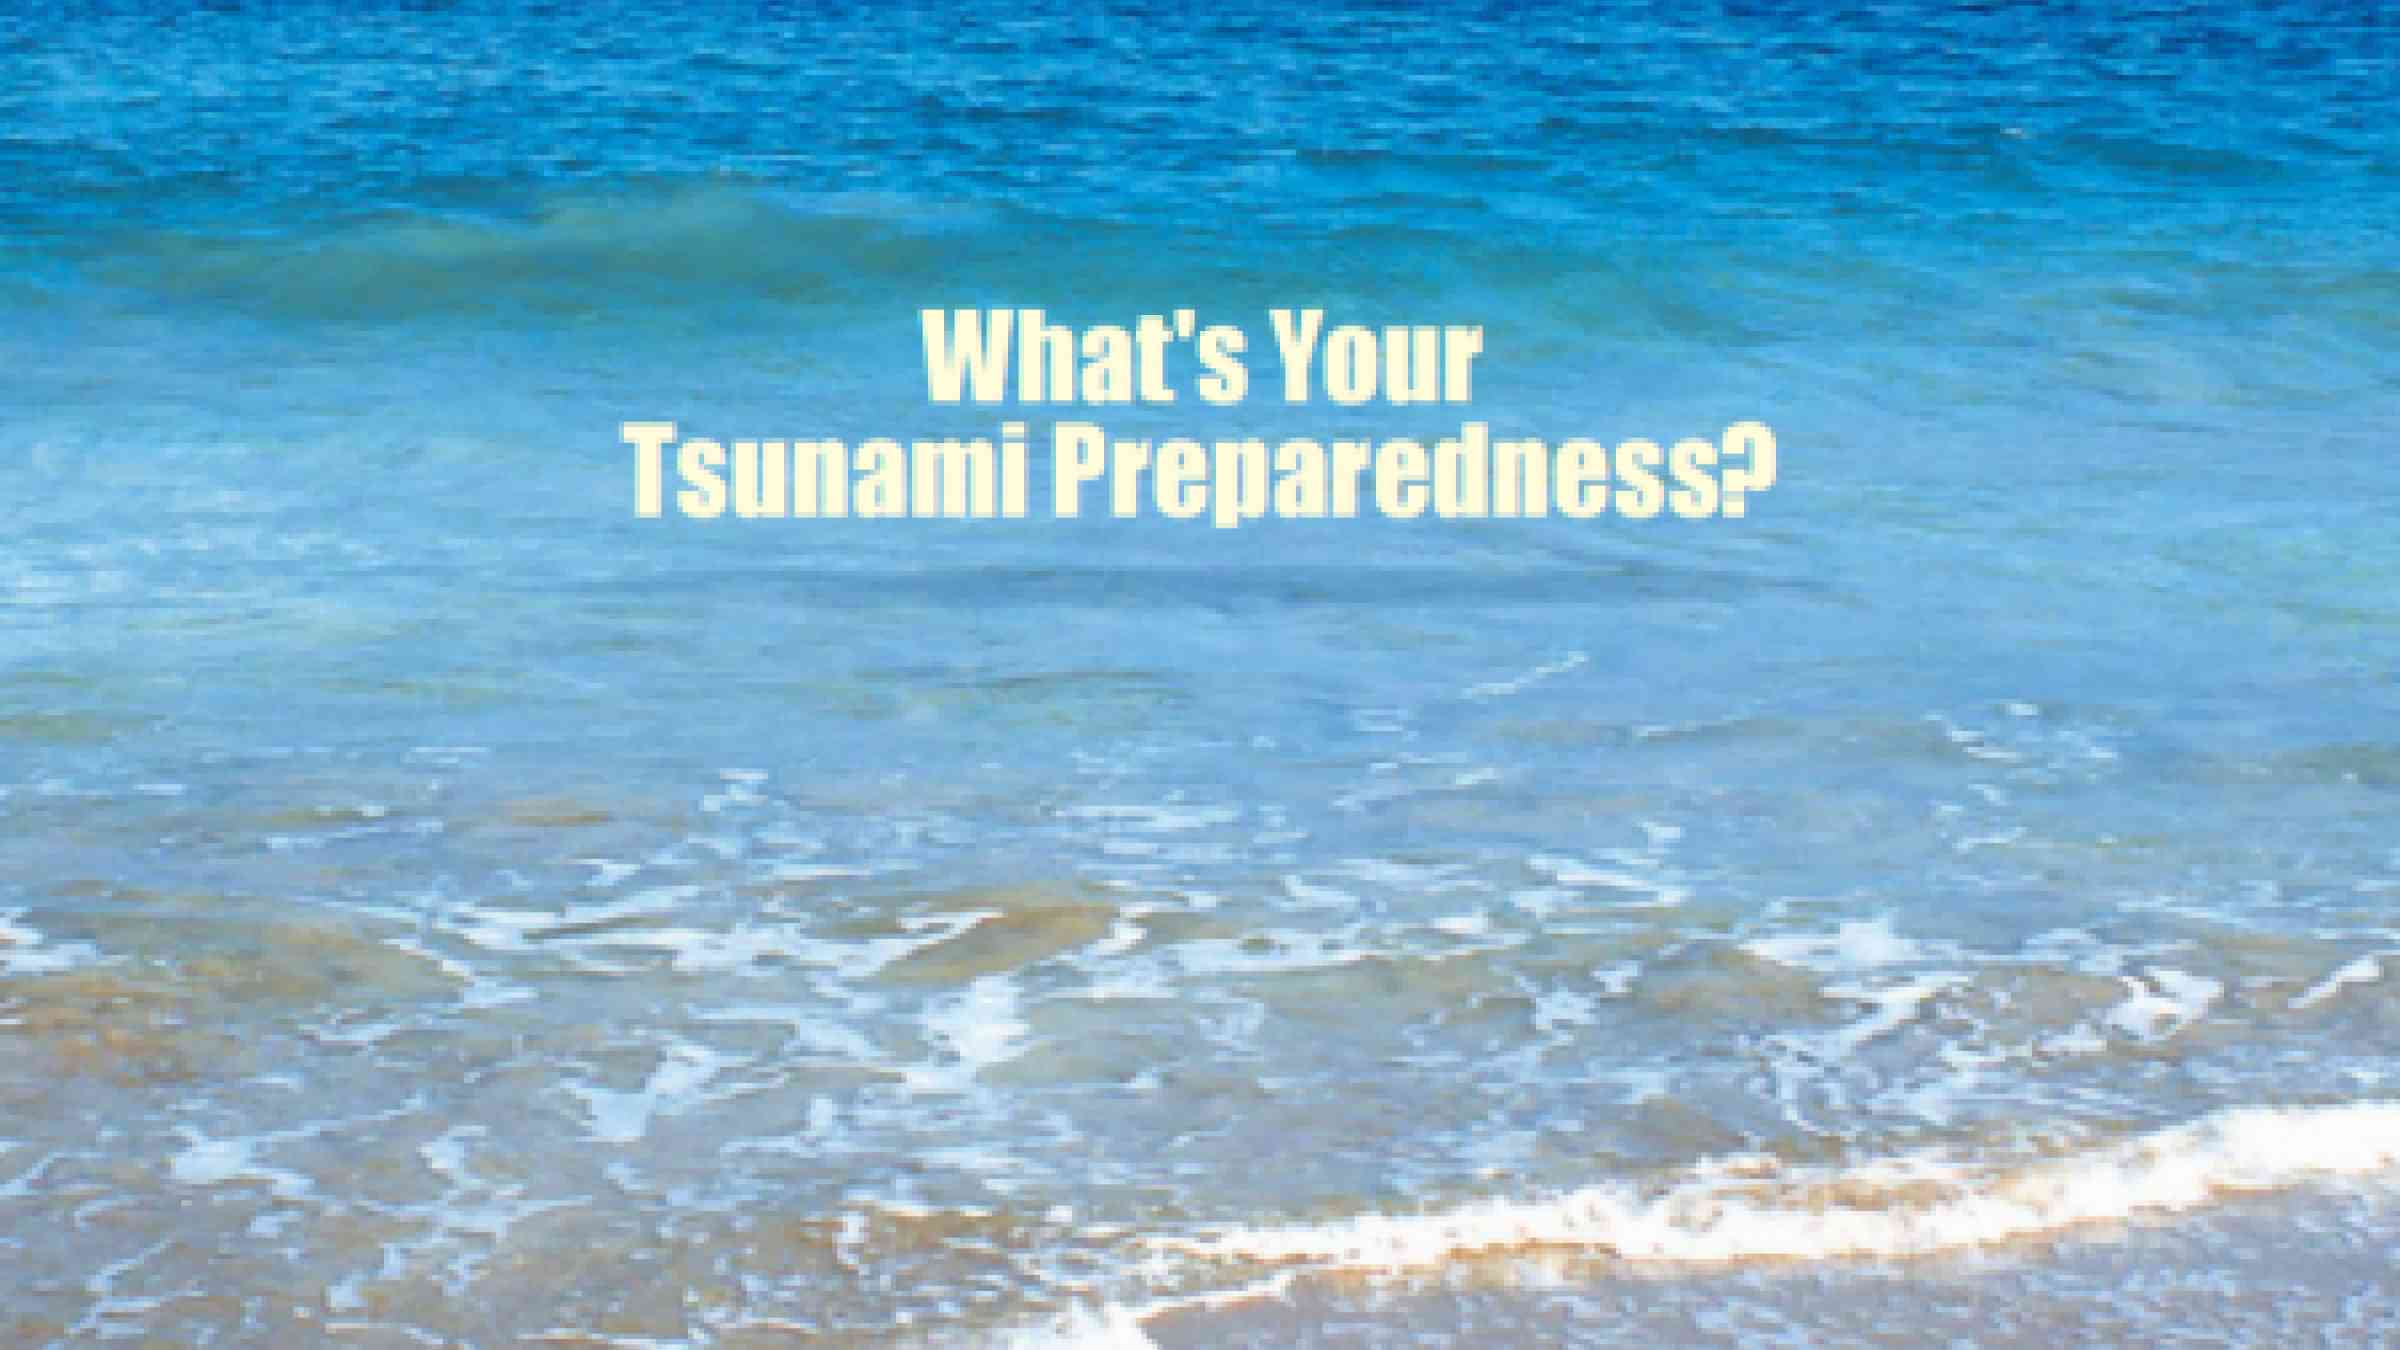 24 countries taking part in tsunami drill